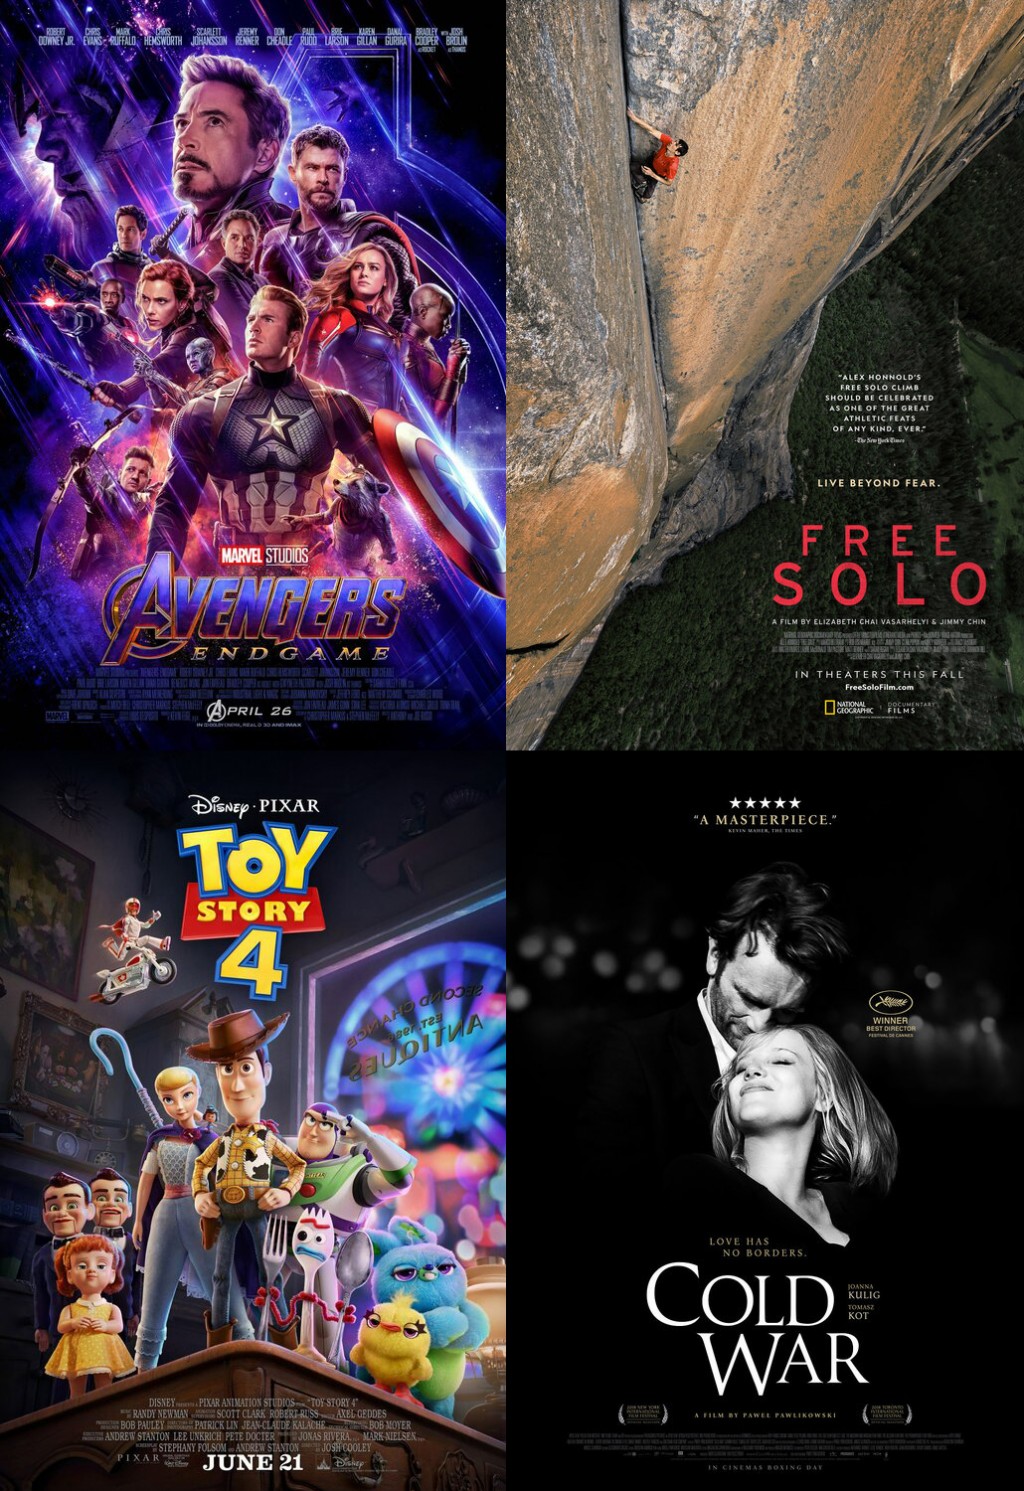 2019 in Movies: The First Six Months